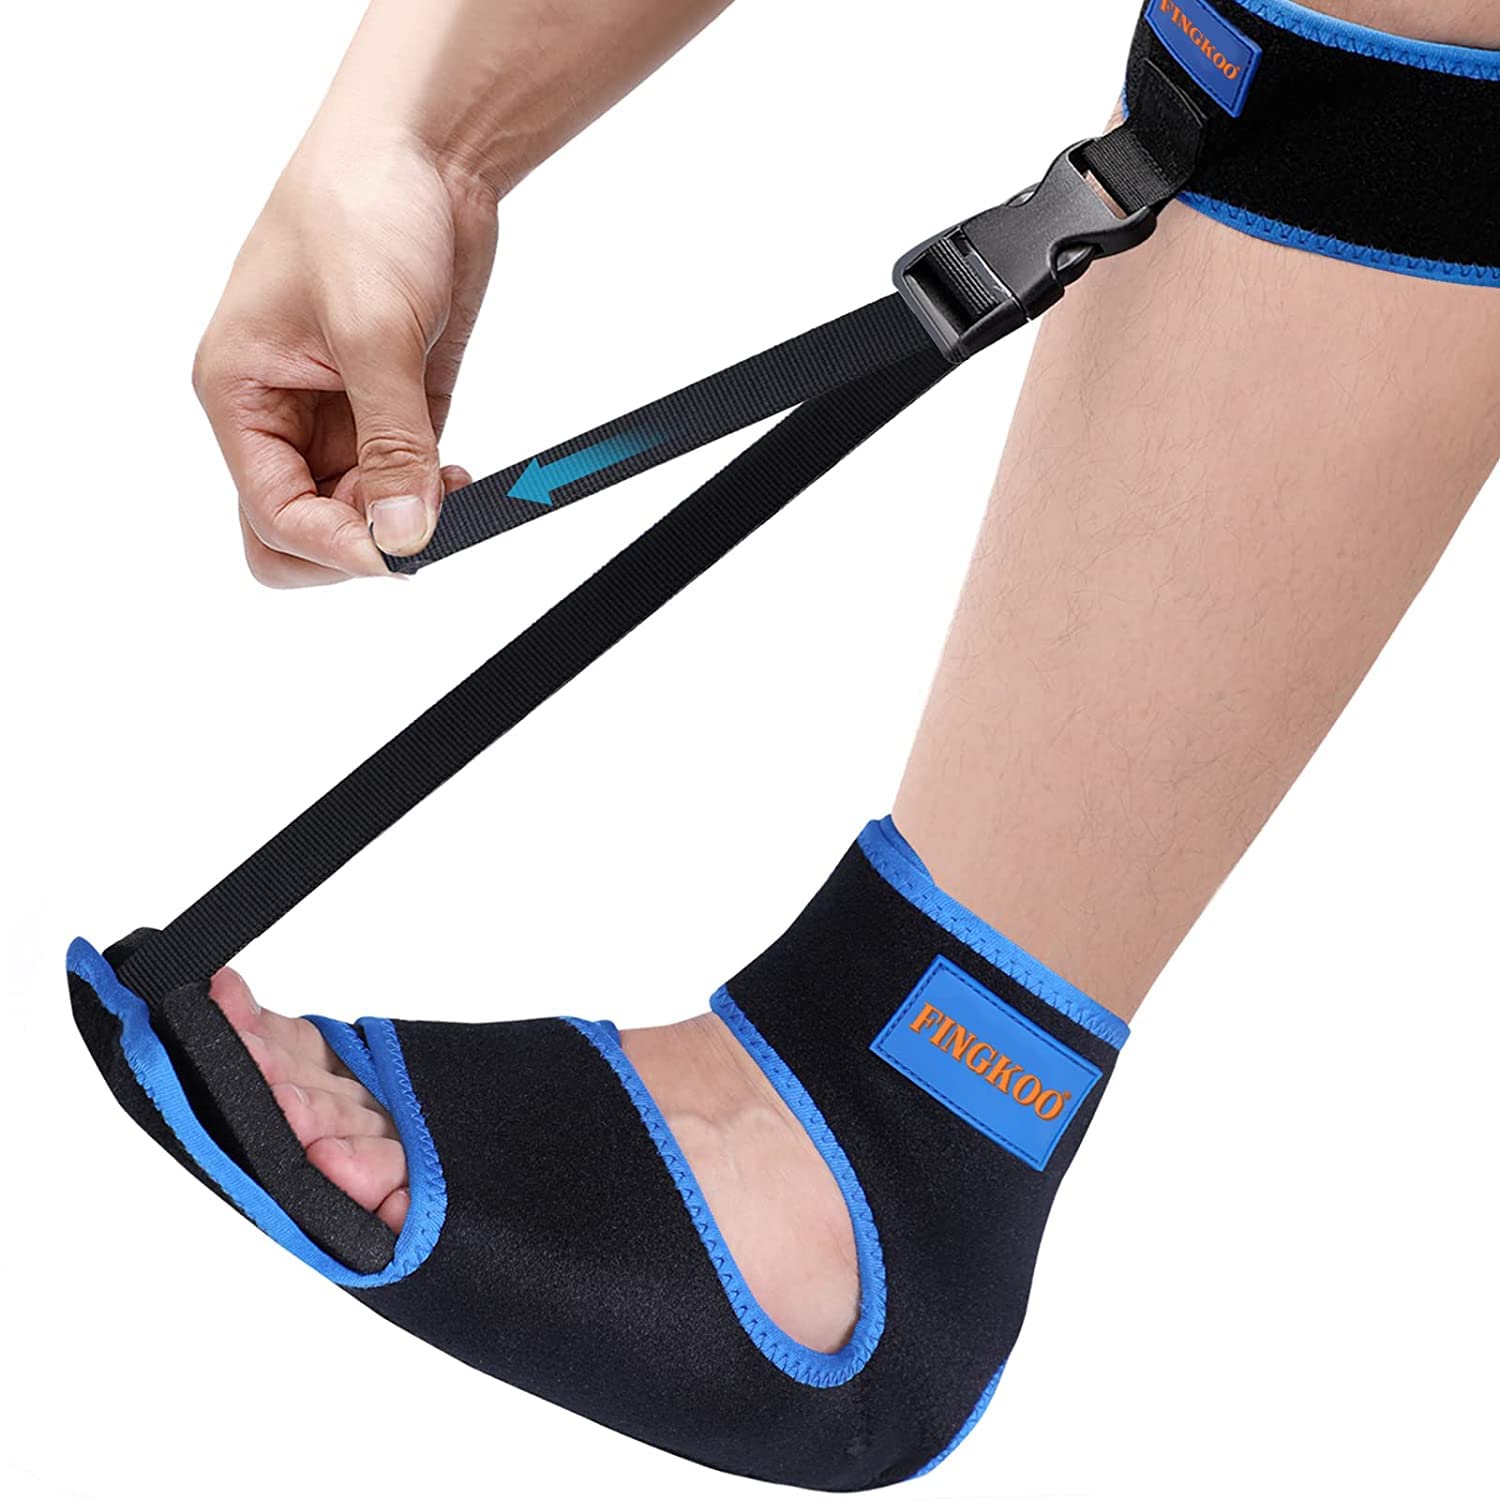 ZUKETANG Brace for Foot Drop, Plantar Fasciitis Splint,Day/Night Dorsal  Splint,Foot Up Brace Prevent Dragging, for Neuropathy Walking Exercise  Assist, Gait Lifting Support,right-L : : Health & Personal Care